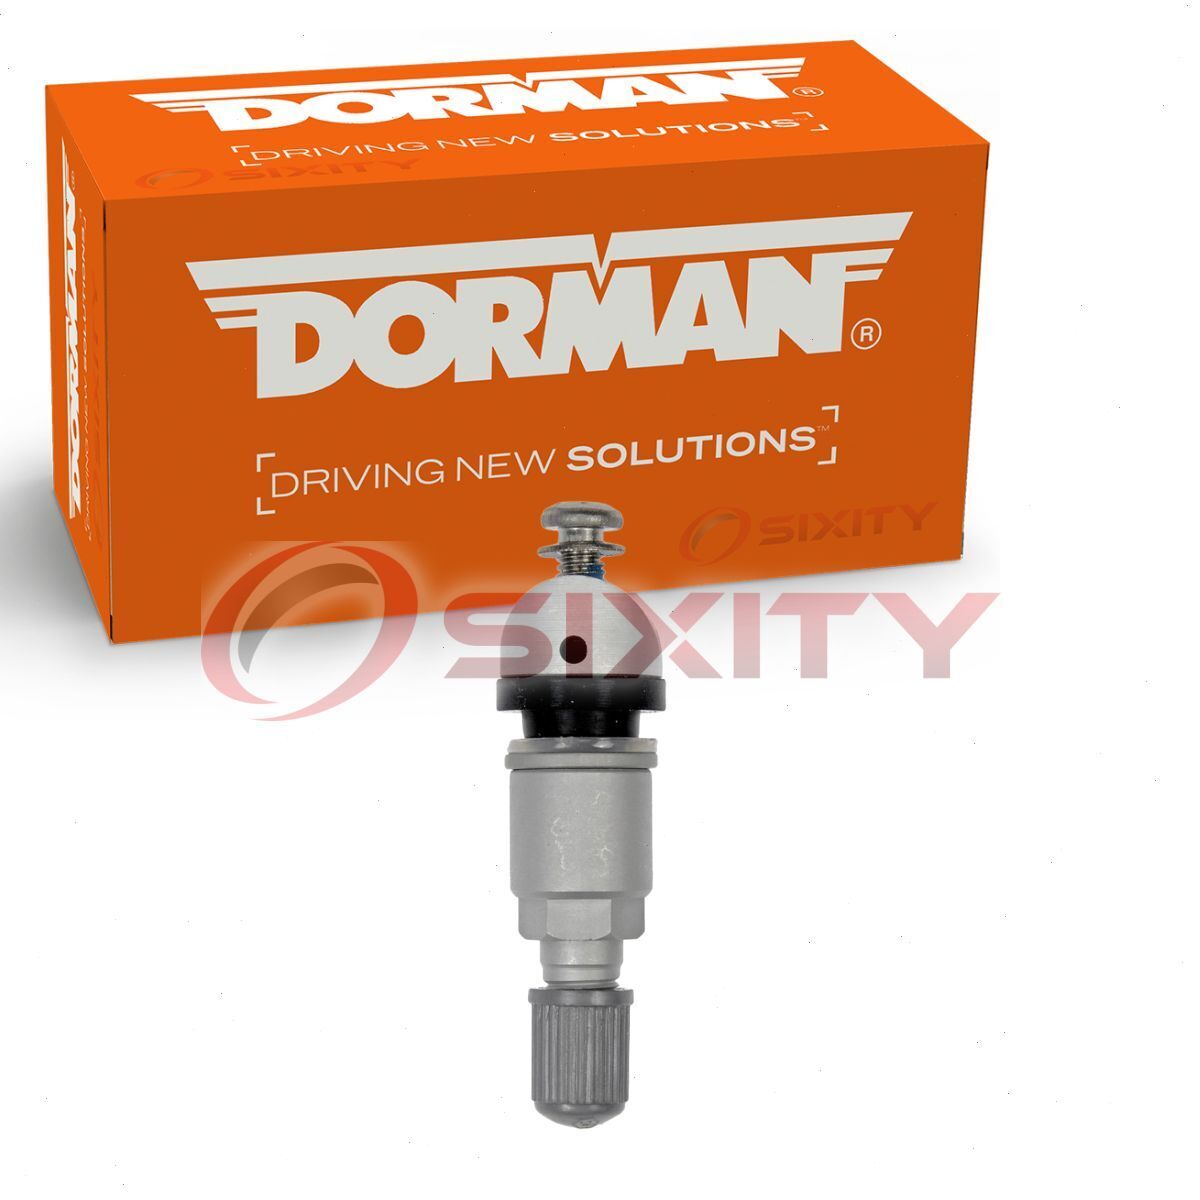 Dorman TPMS Valve Kit for 1999 BMW 323is Tire Pressure Monitoring System  mf